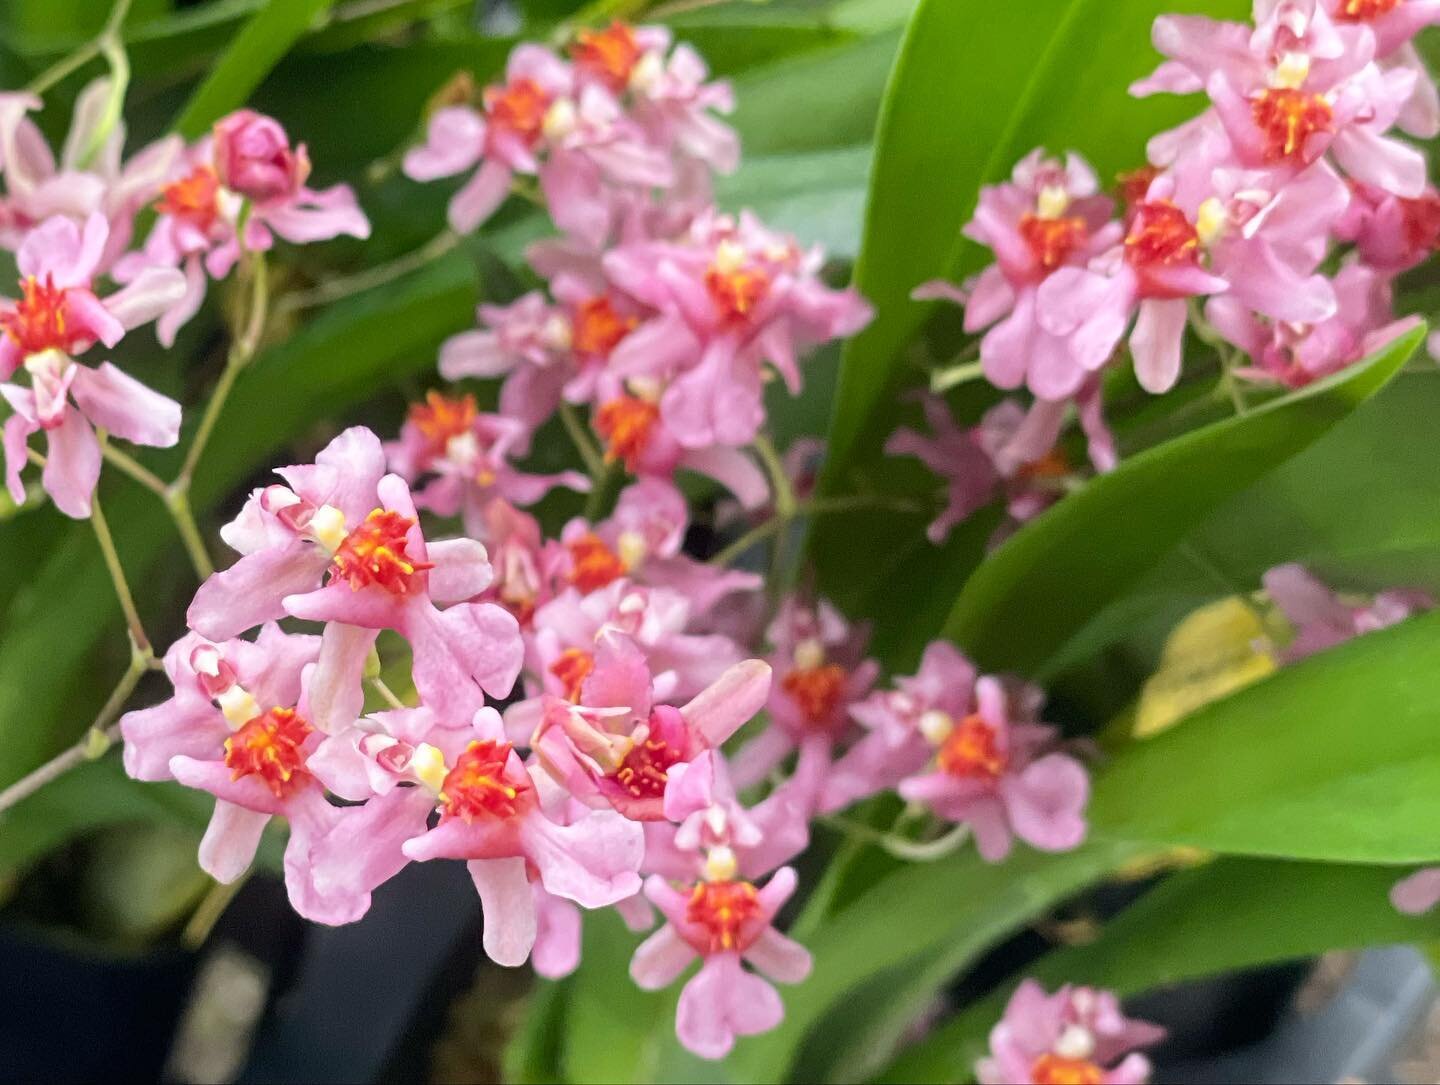 These miniature Onc. Twinkle &lsquo;Pink Fantasy&rsquo; remind us of Cherry Blossoms, especially this time of year.

#orchid #orchids #pinkorchid #miniatureorchids #orchidsofinstagram #orchidoftheday #ootd #sakura #cherryblossom #🌸 #oncidium #oncidi